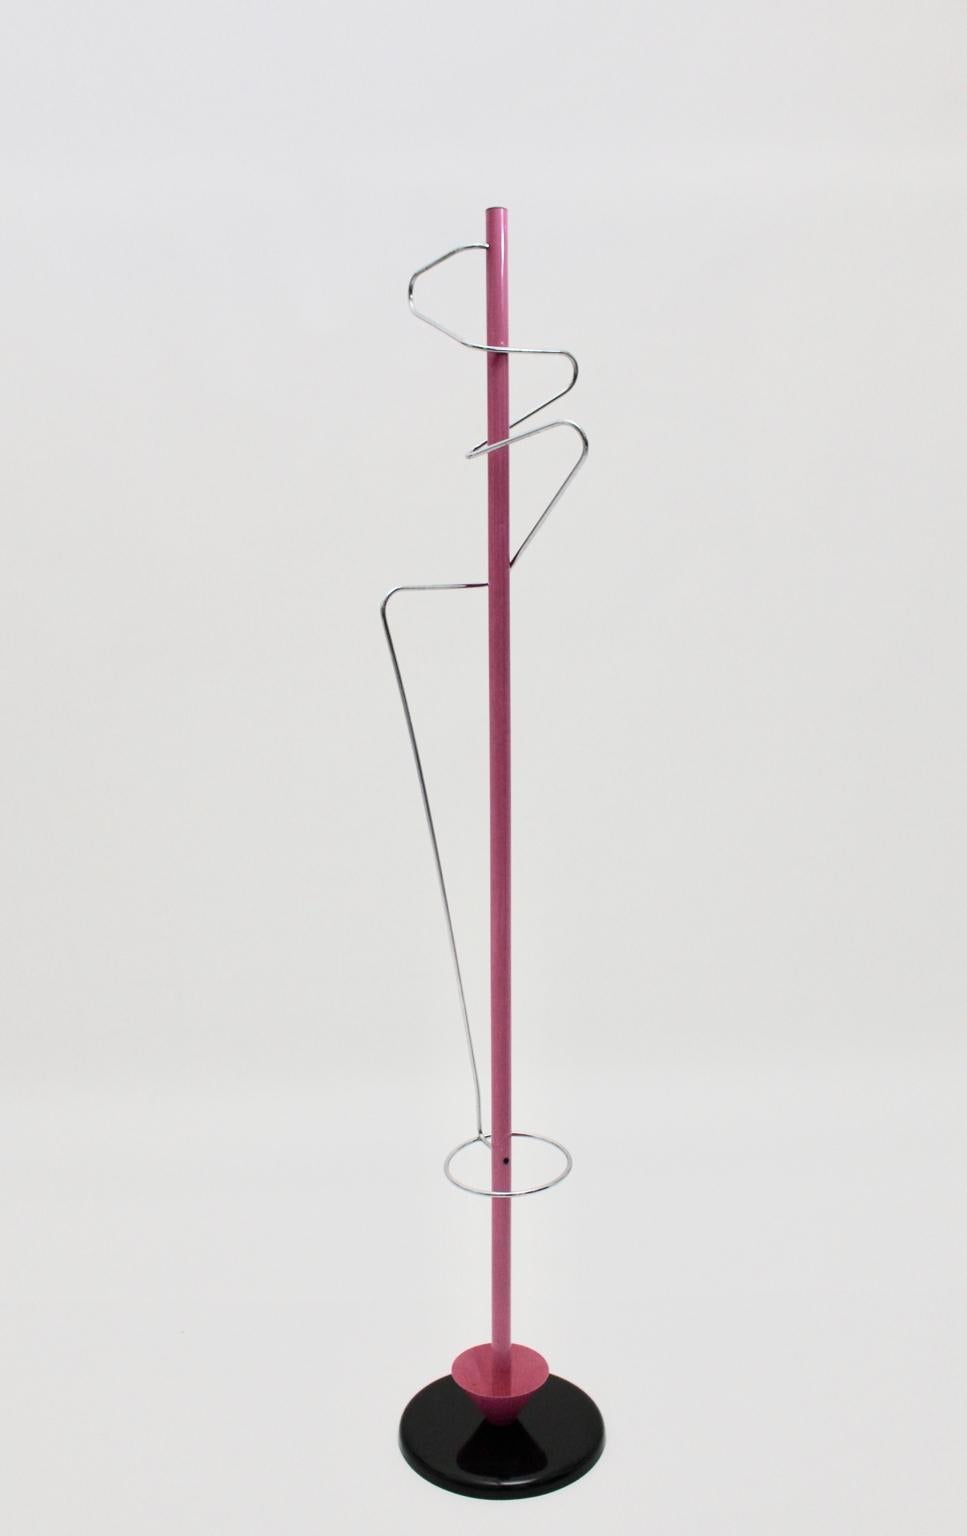 The coat rack with an integrated umbrella stand was designed and made in the 1980s. The coat rack was made of tube steel pink and black lacquered and chromed metal.
Very good condition with minor signs of age.
Approximate measures:
Height 178.5